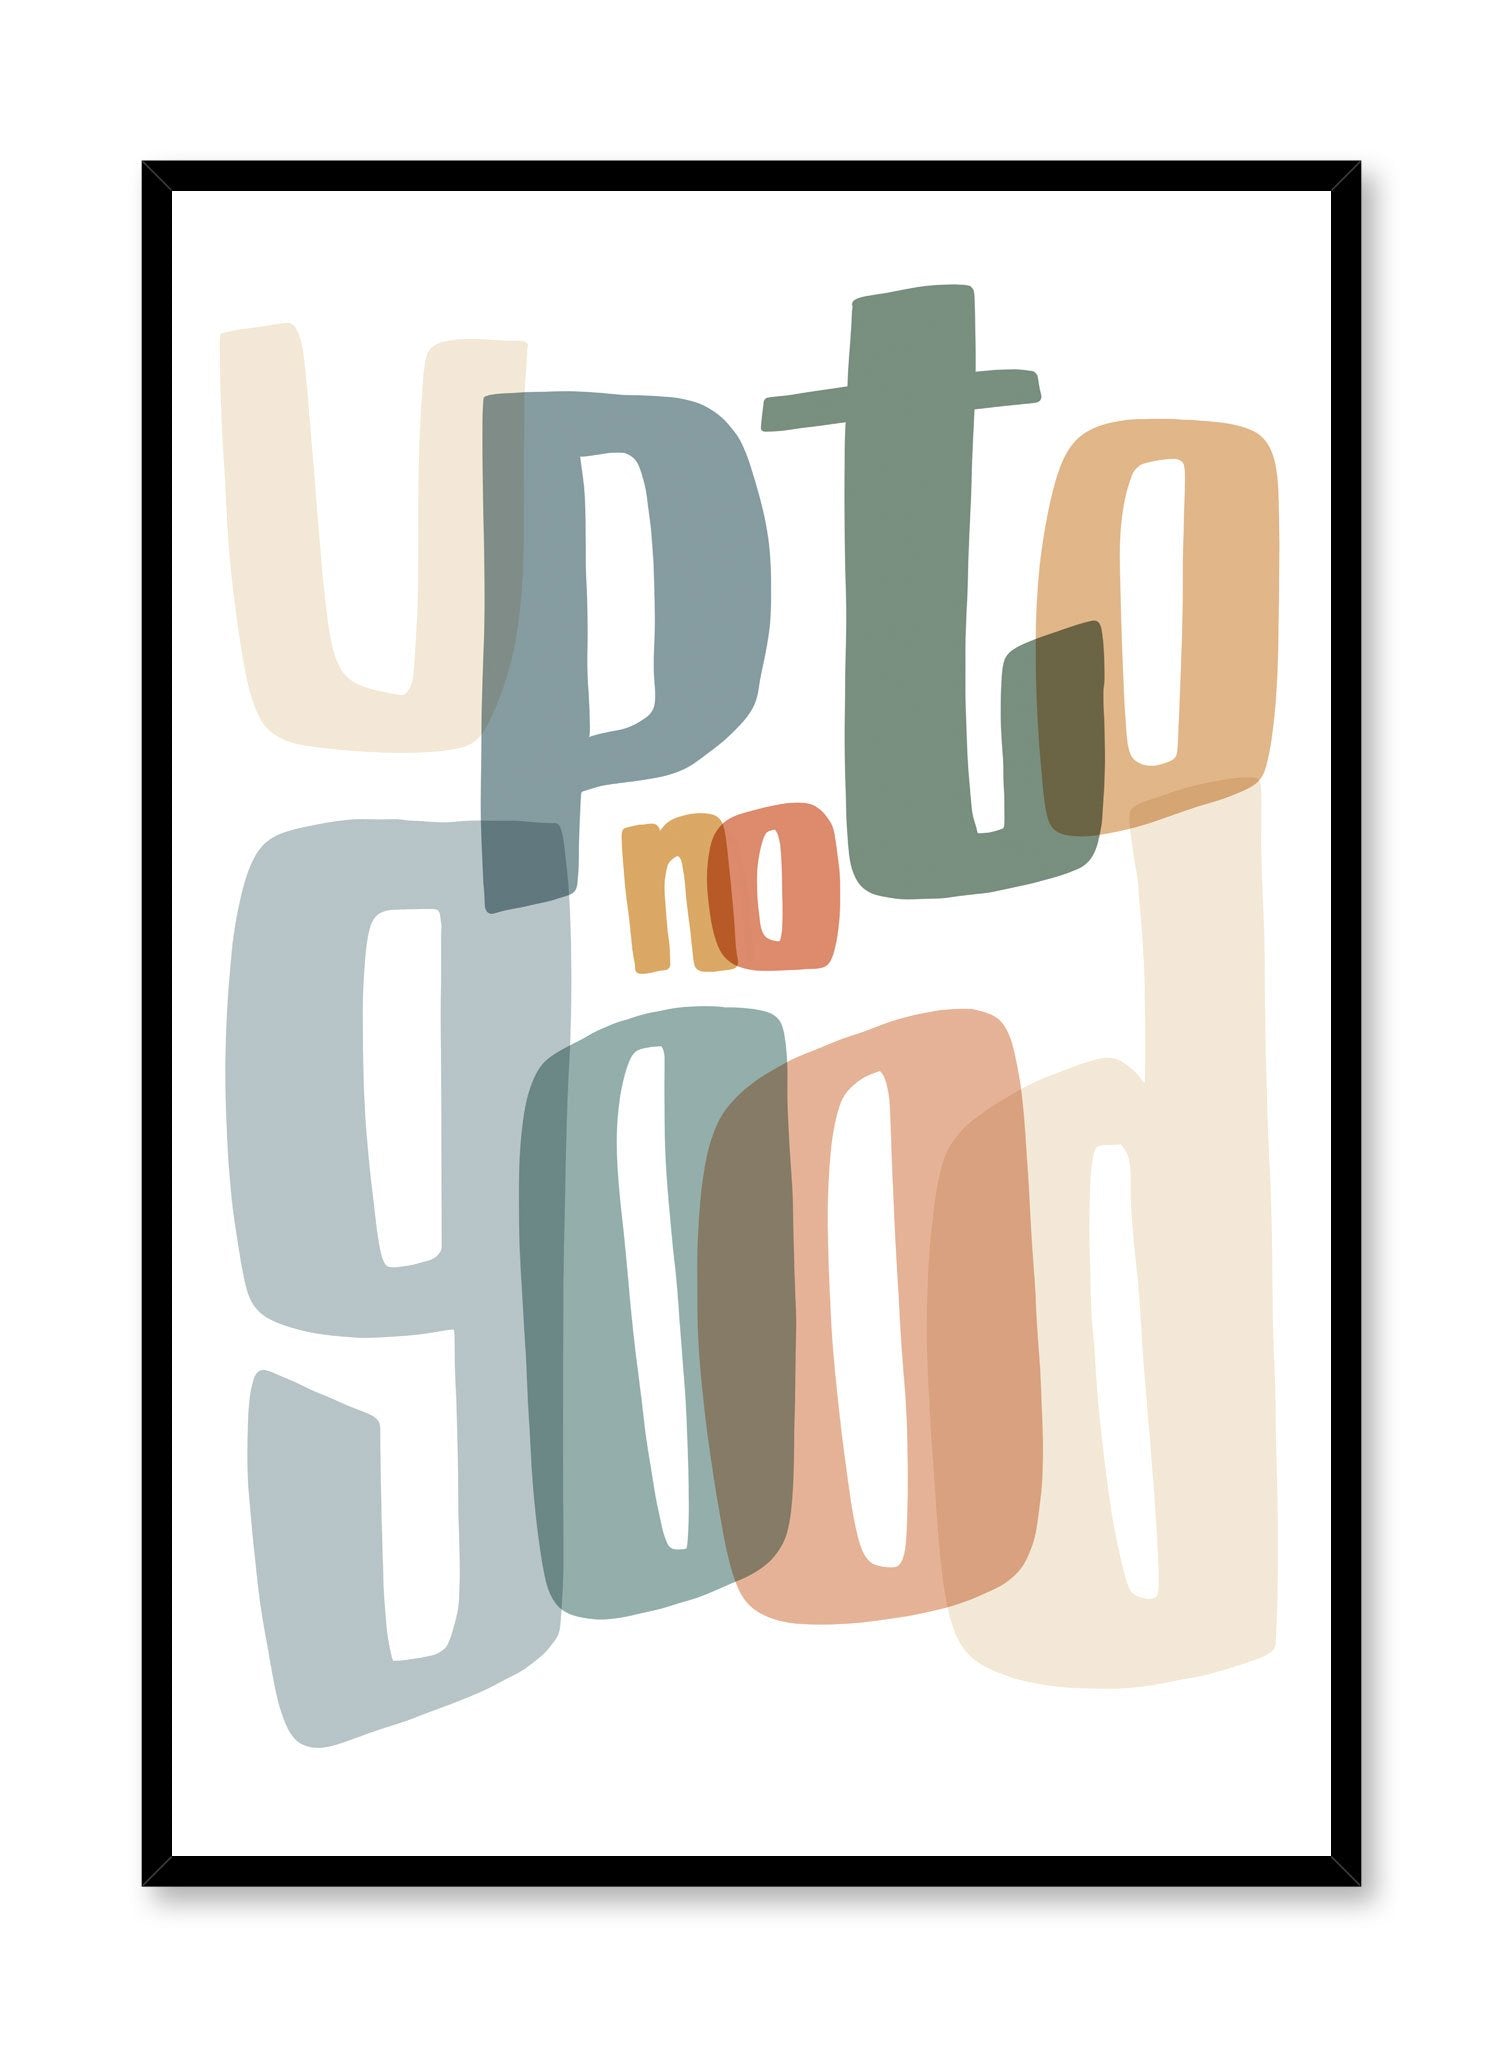 Up to No Good is a minimalist typography by Opposite Wall of the words "Up to No Good" written in big overlapping colourful letters. 